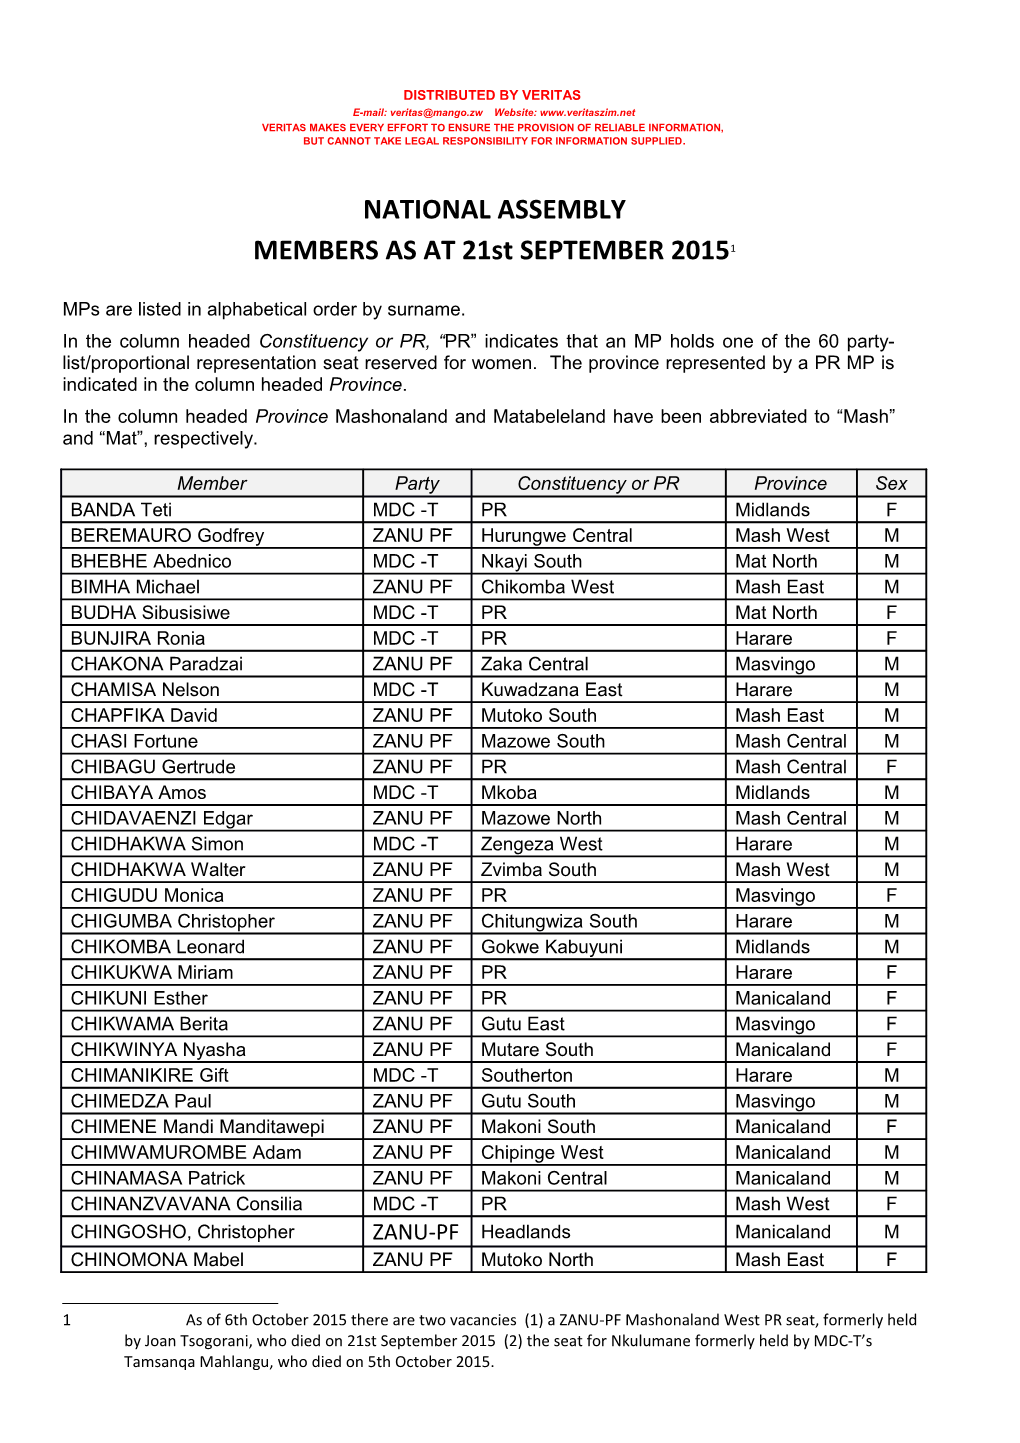 National Assembly Members As at 21St September 2015